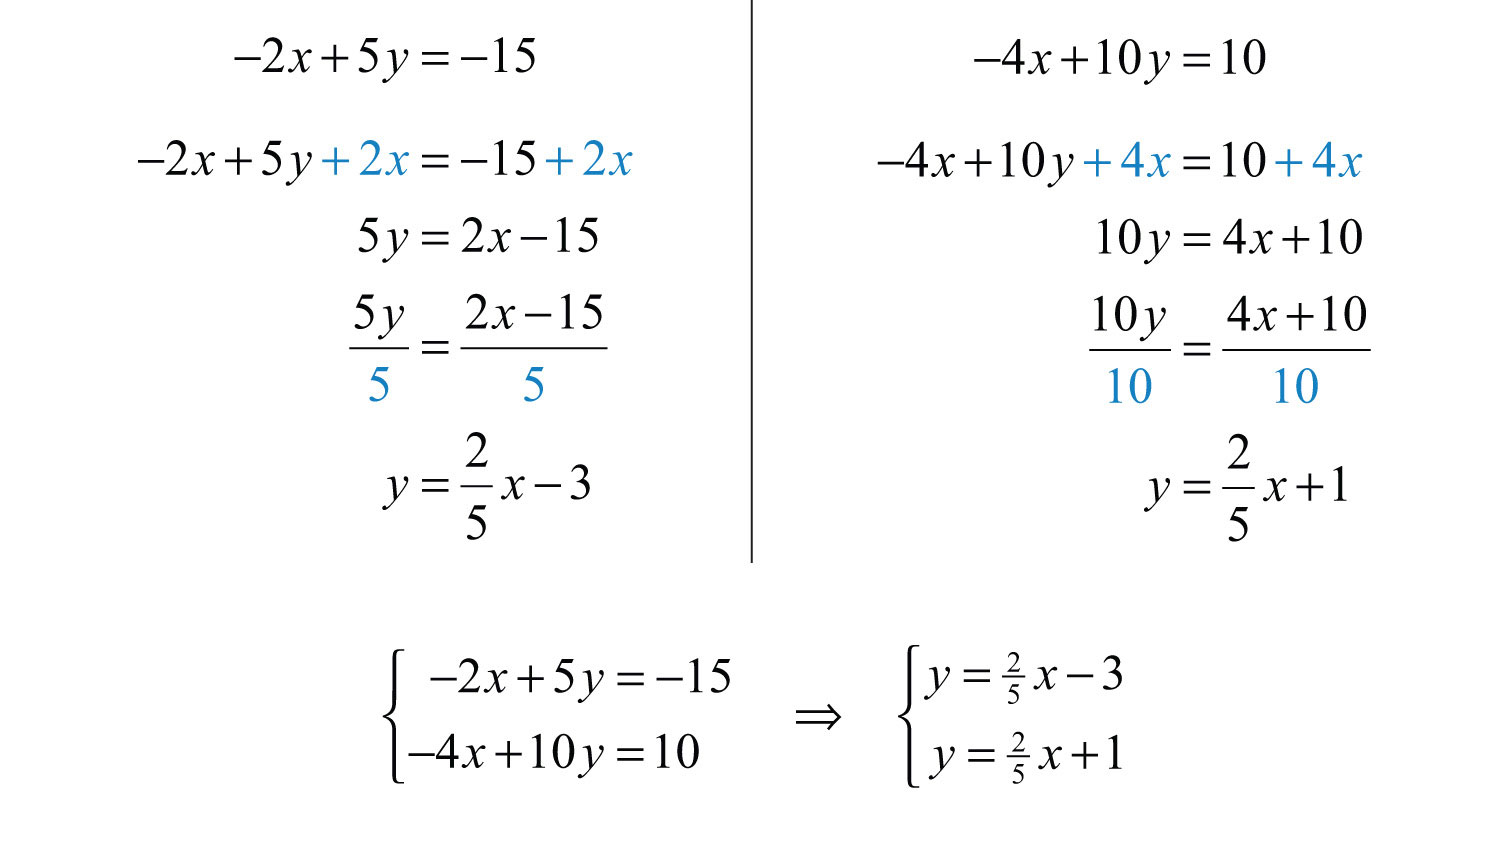 Number of solutions to equations